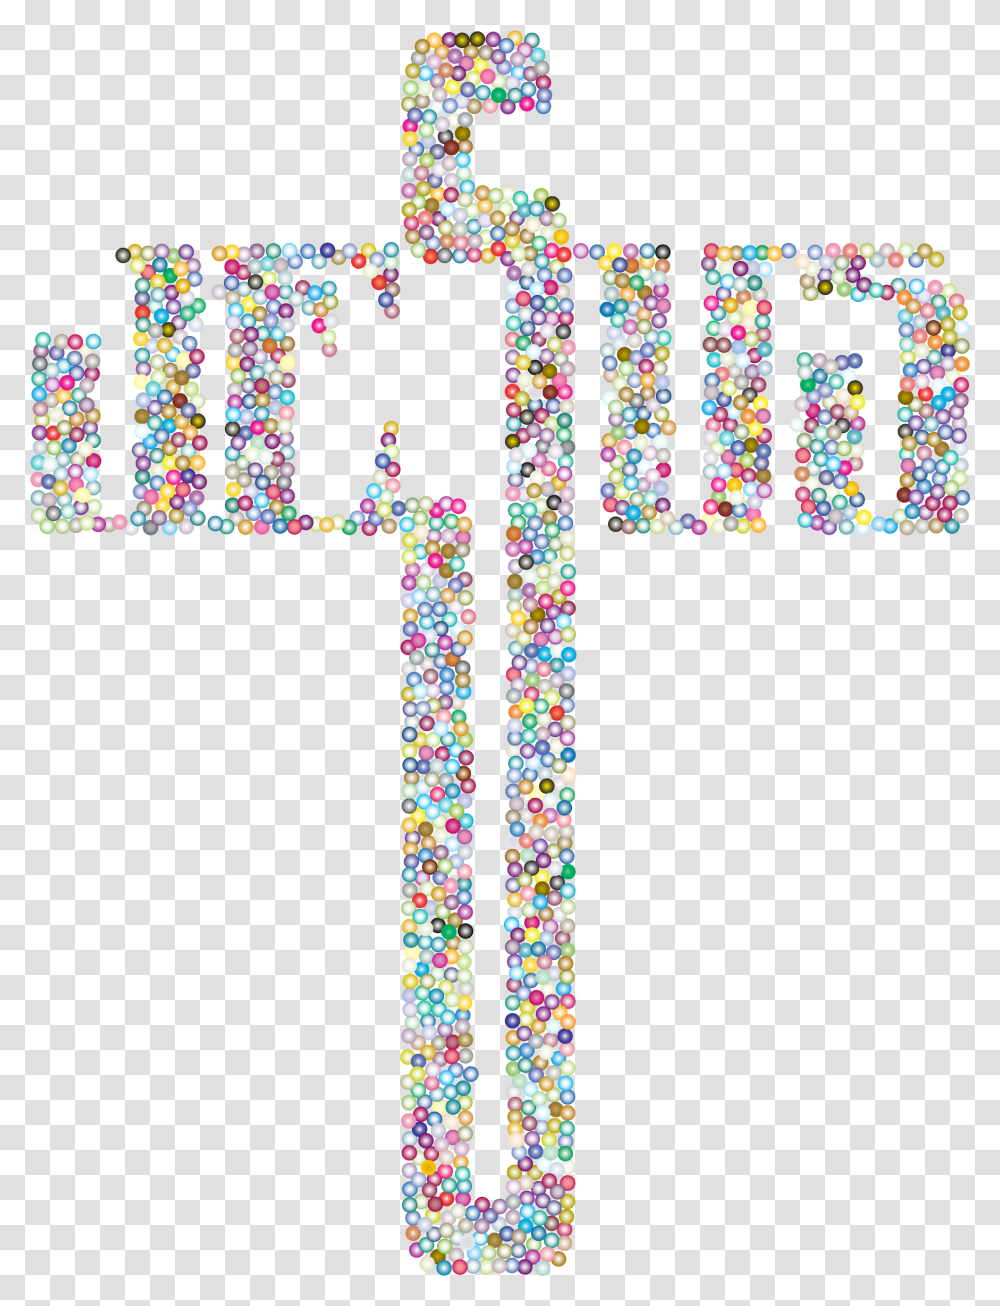 Prismatic Jesus Cross Typography Dots No Background Cross Christian Cross Background, Pac Man Transparent Png